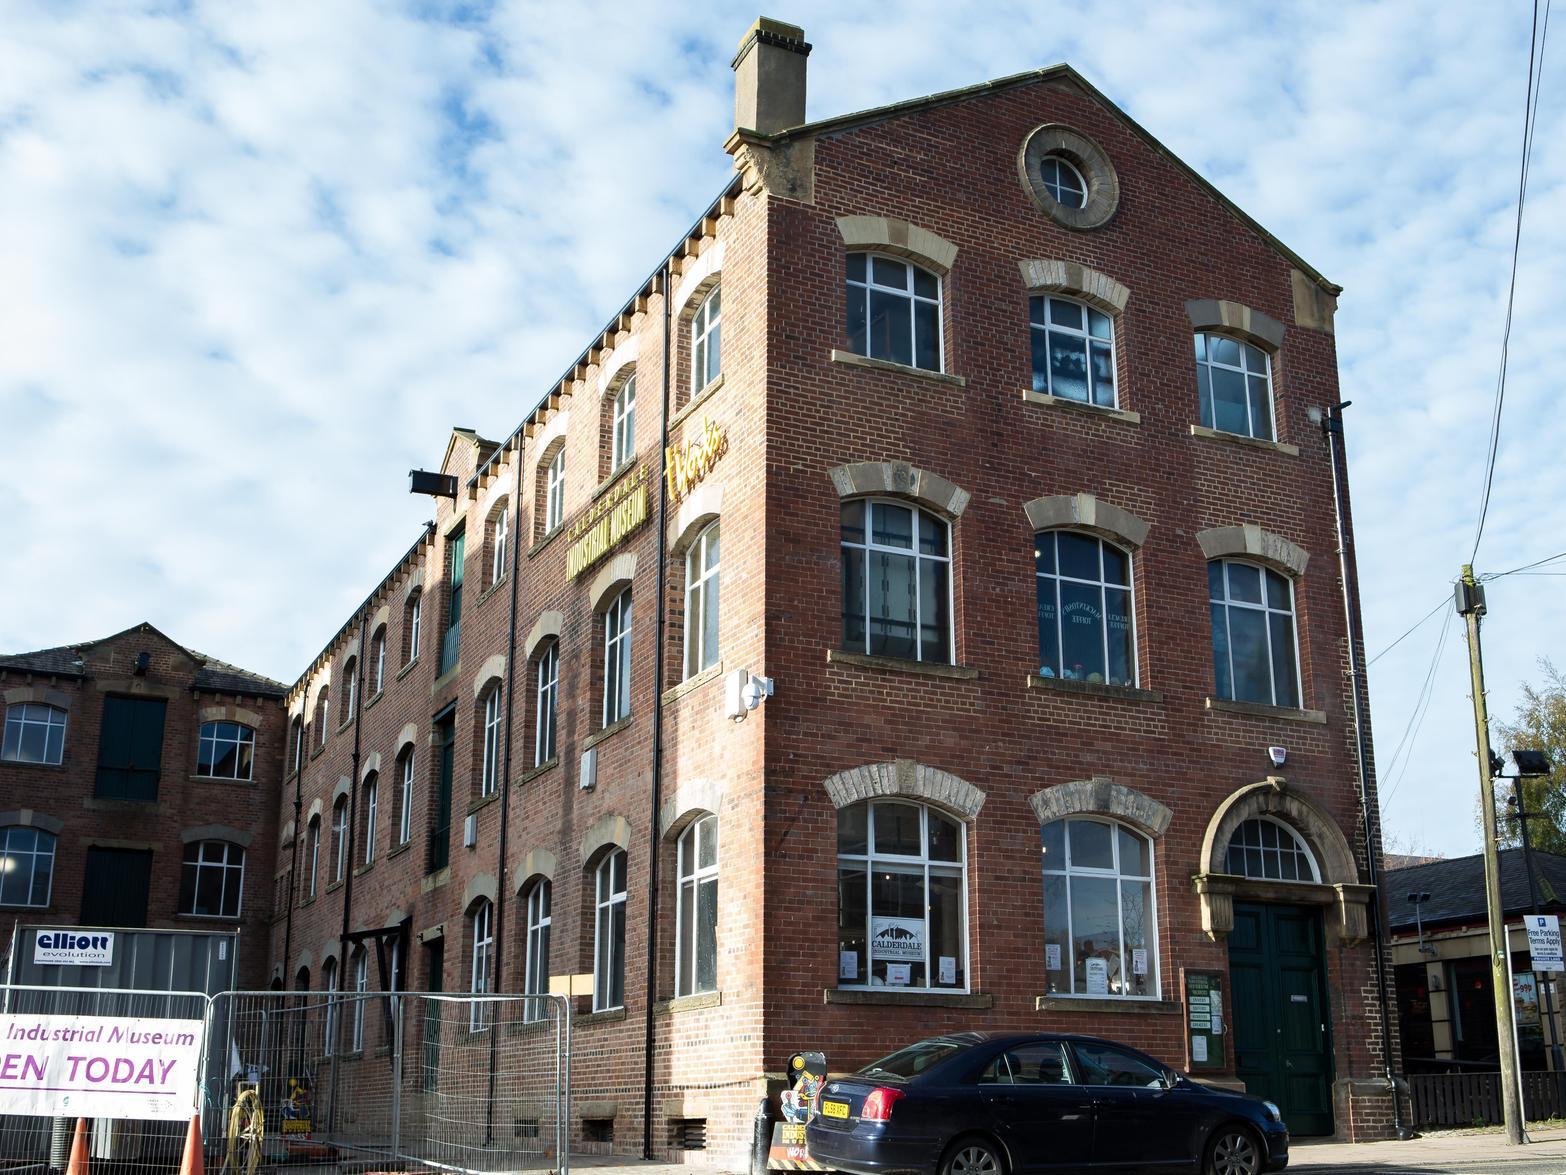 This museum in Halifax town centre is open every Saturday from 10am to 4pm and gives visitors the chance to see a collection of industrial machinery and artififacts from Calderdale's past.